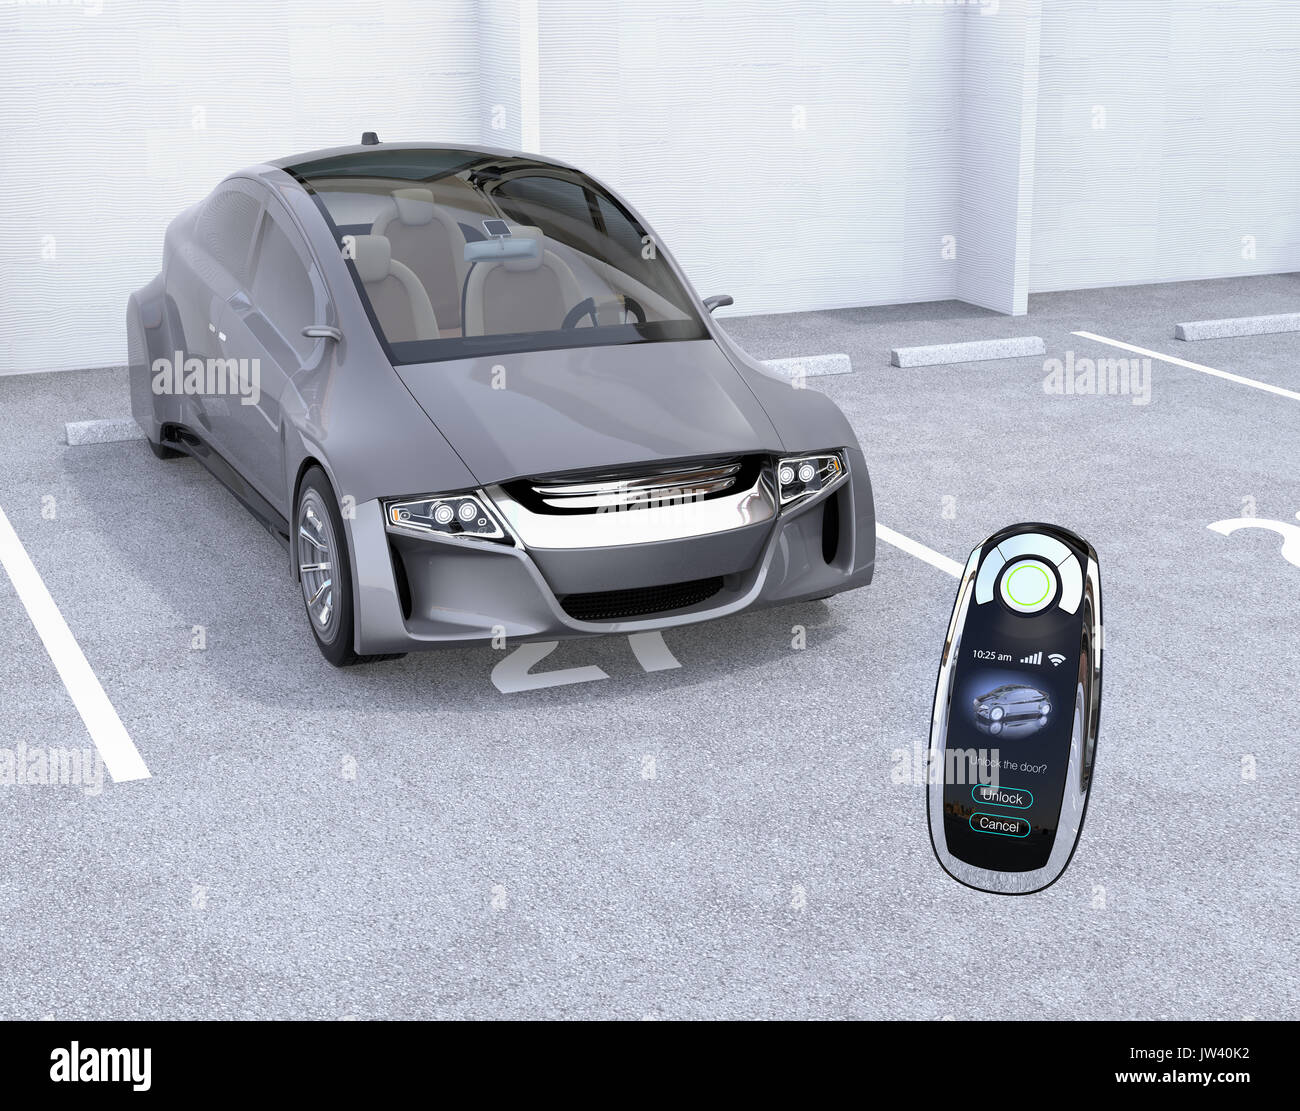 Smart car key and electric car in parking lot. 3D rendering image. Stock Photo